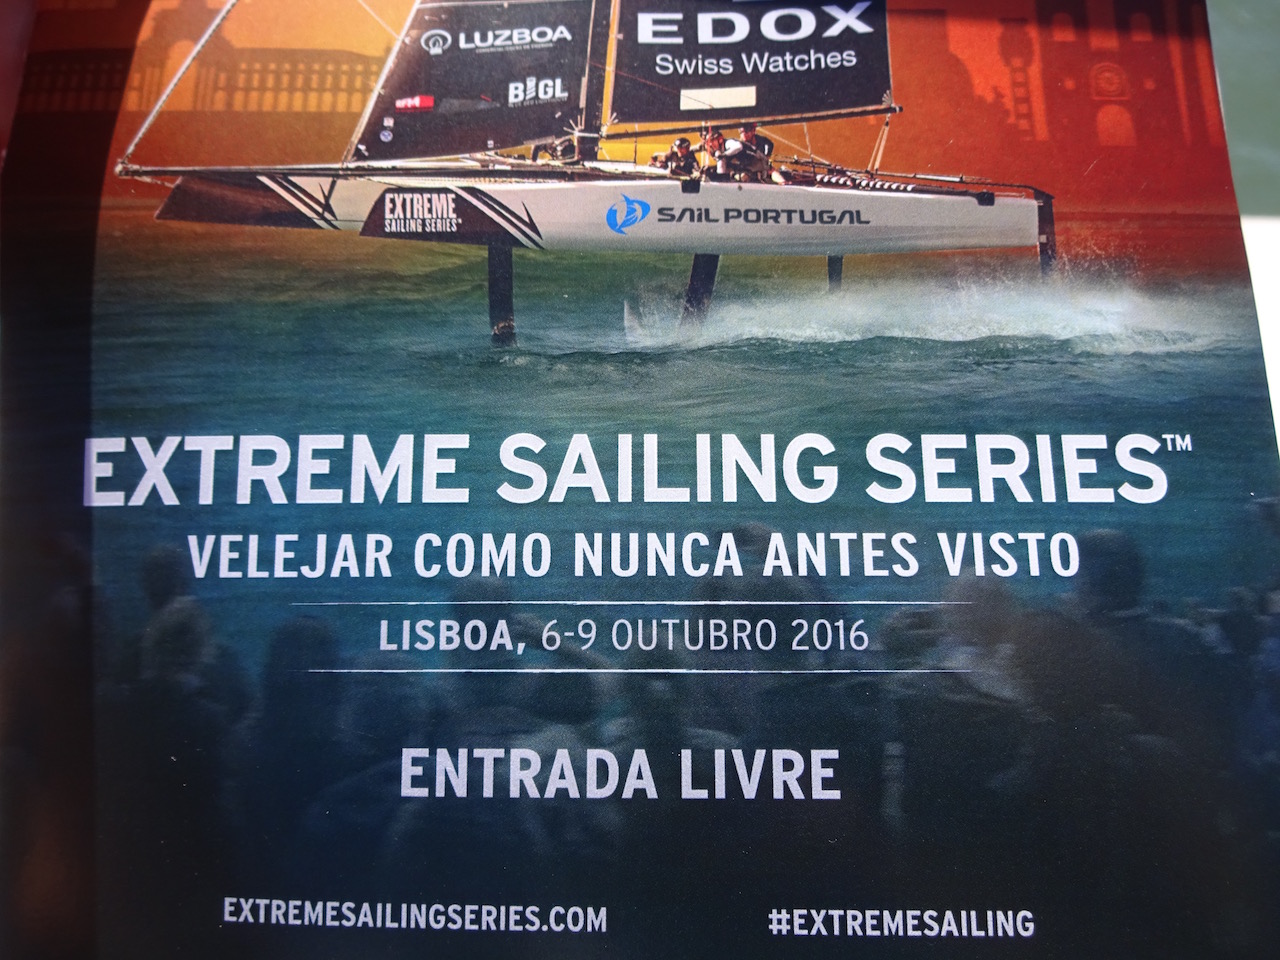 die Extrem Sailing Serie macht Station in Portugal